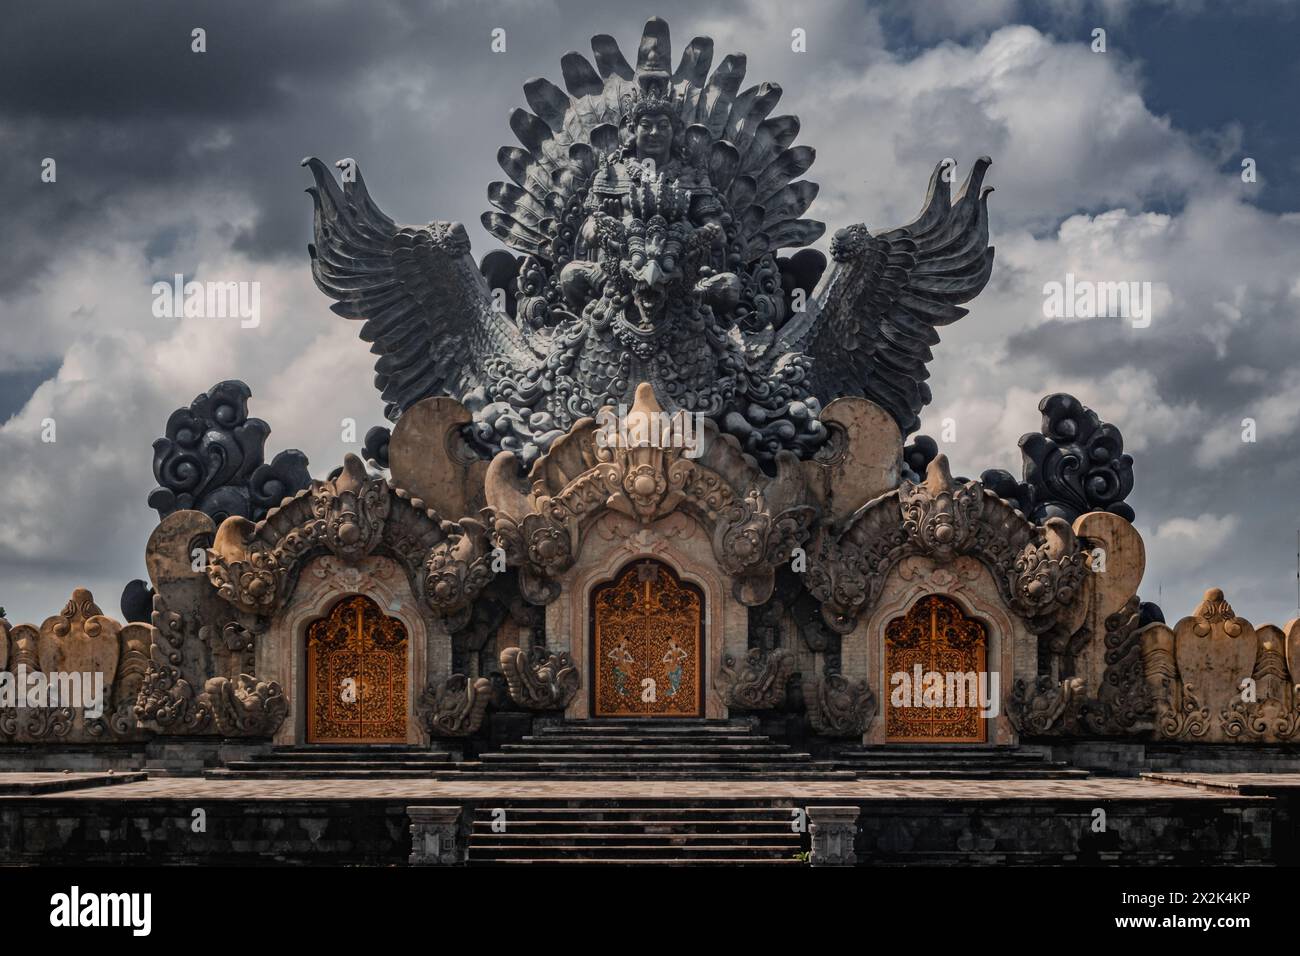 This image captures a majestic traditional temple adorned with intricate stone carvings, featuring mythical creatures and soaring designs against a dr Stock Photo